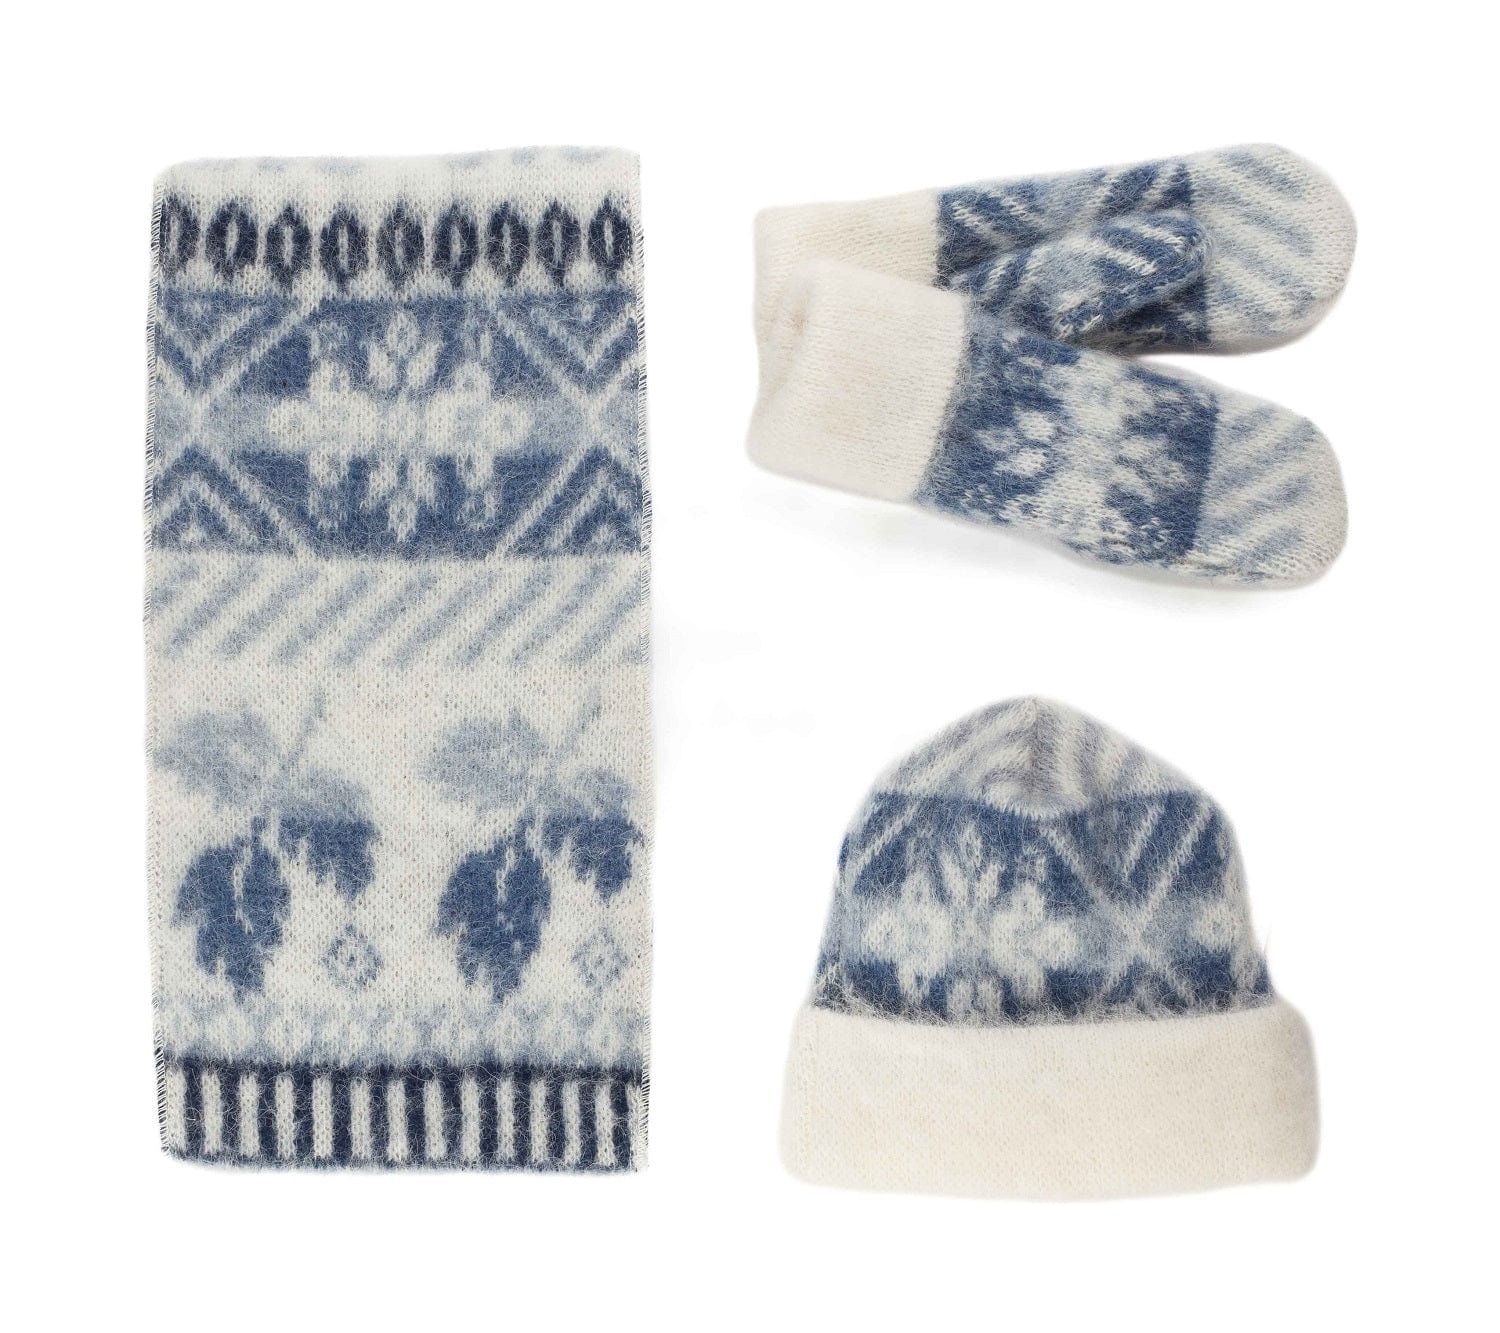 Brushed wool hat, scarf and mittens with 8 Leaf Rose pattern - The Icelandic Store